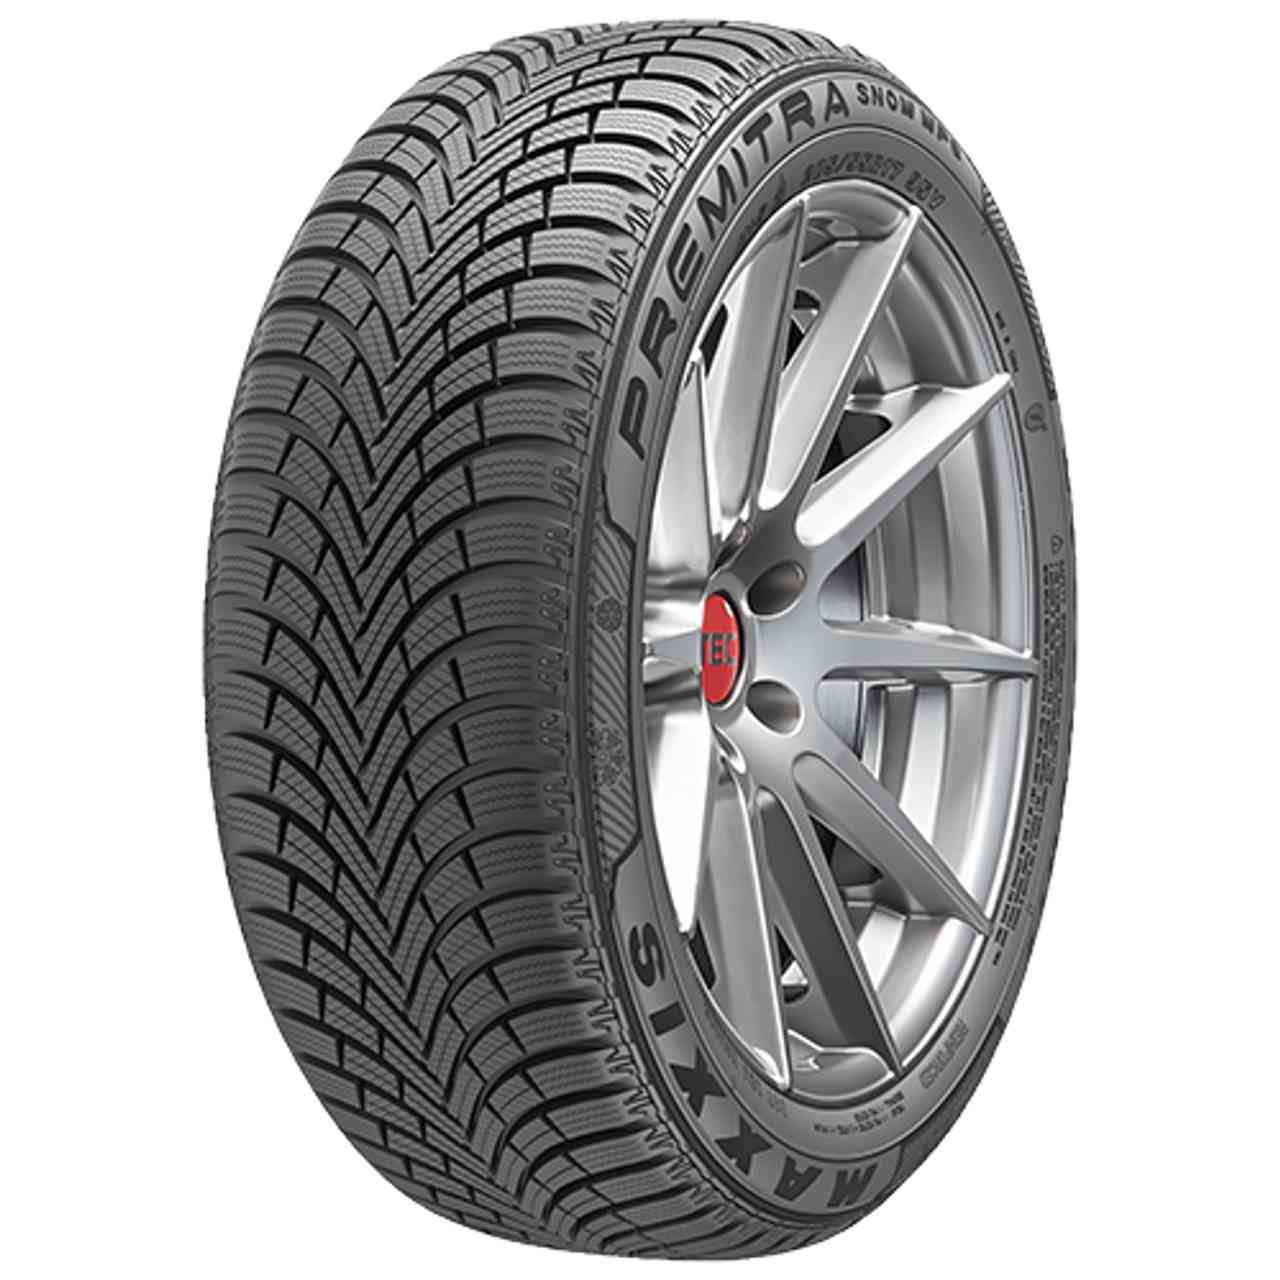 MAXXIS PREMITRA SNOW WP6 215/60R16 99H BSW